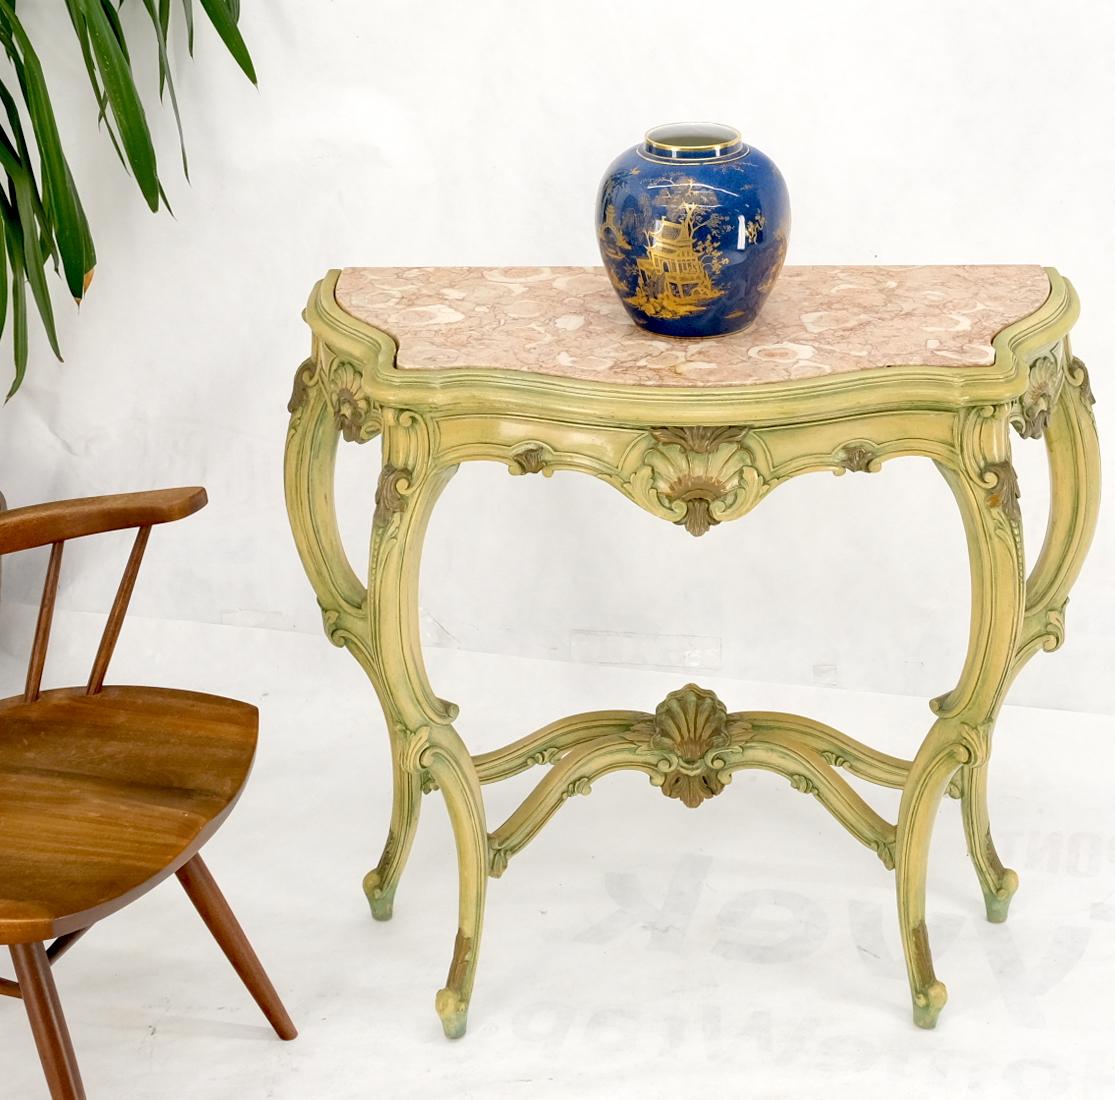 Carved French Regency paint decorated console table w/ rouge pink marble top.
Hand painted carved wood frame green, olive, yellow. Figural pink marble top. Nice compact to medium size.